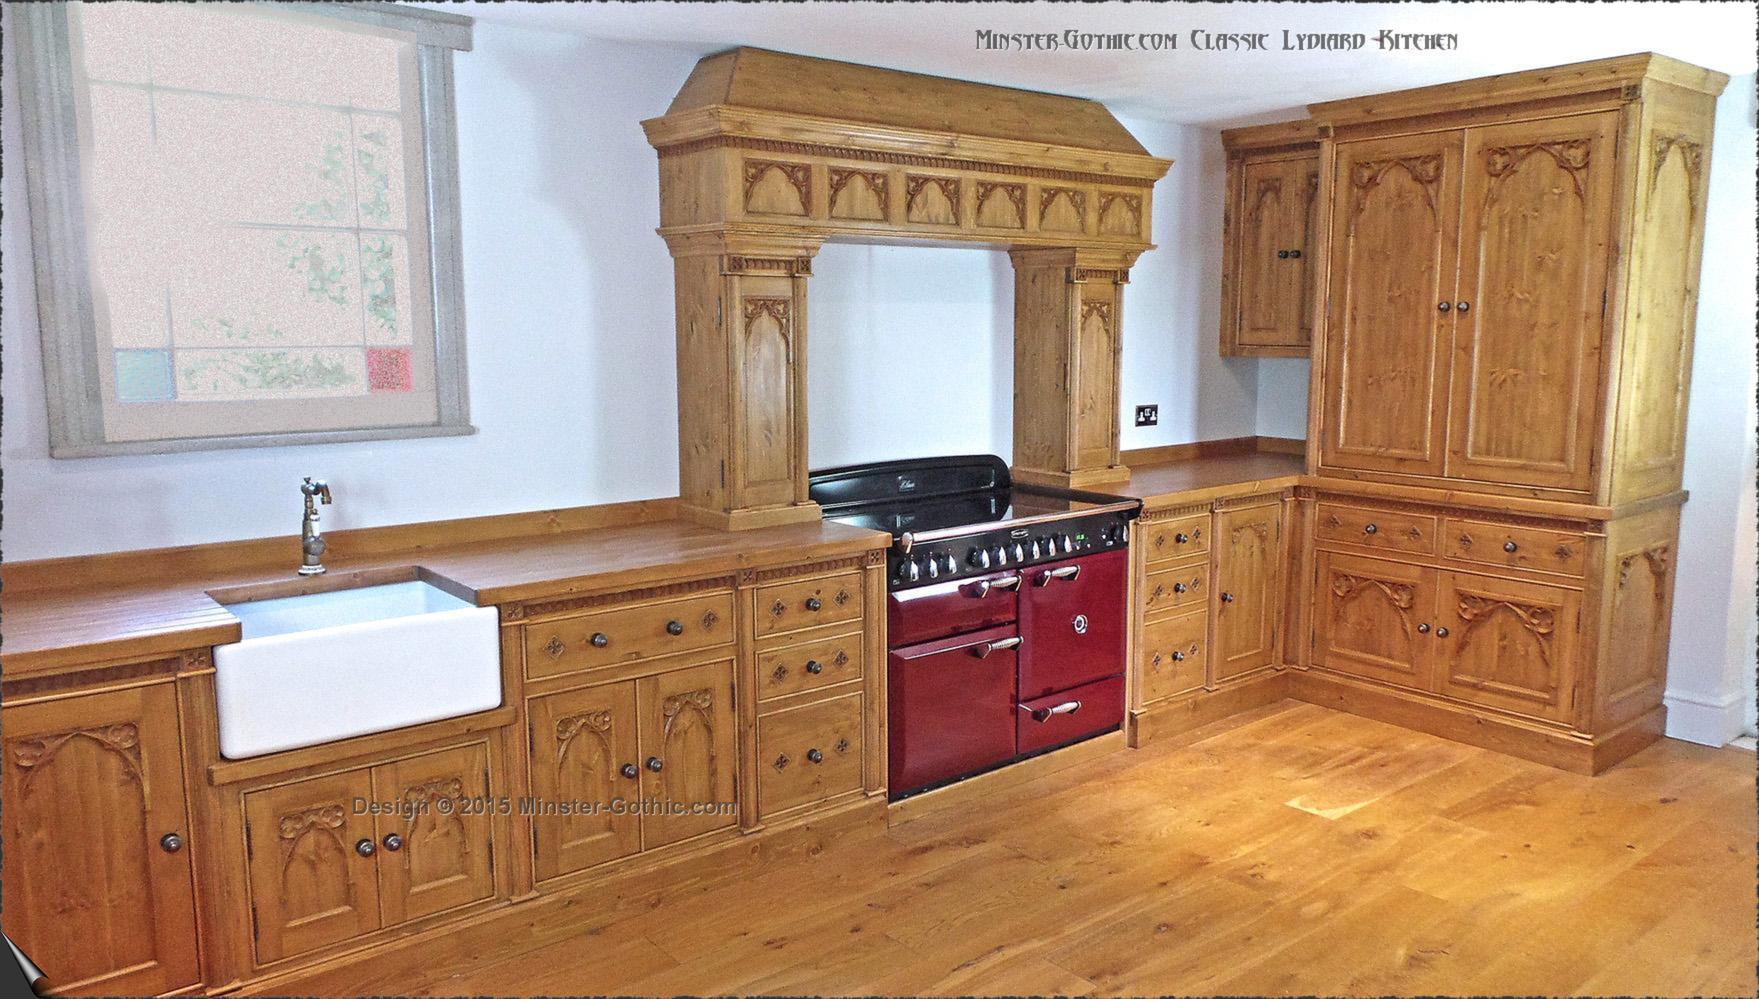 Minster Gothic kitchens. Free-standing or fitted. - Minster Gothic